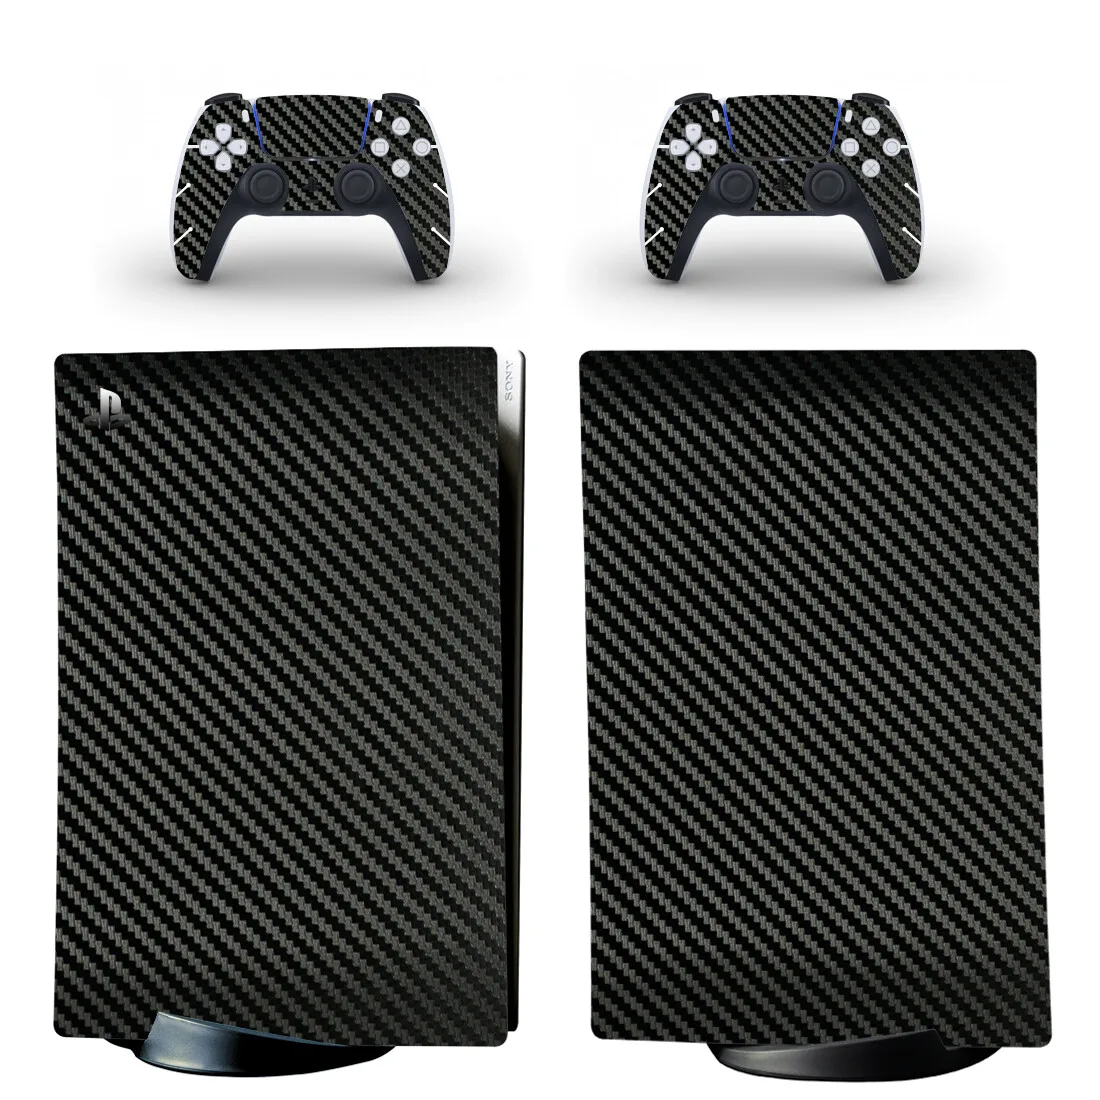 Carbon Fiber Ps5 Digital Edition Skin Sticker Decal Cover For Playstation 5  Console And Controllers Ps5 Skin Sticker Decal Vinyl - Stickers - AliExpress